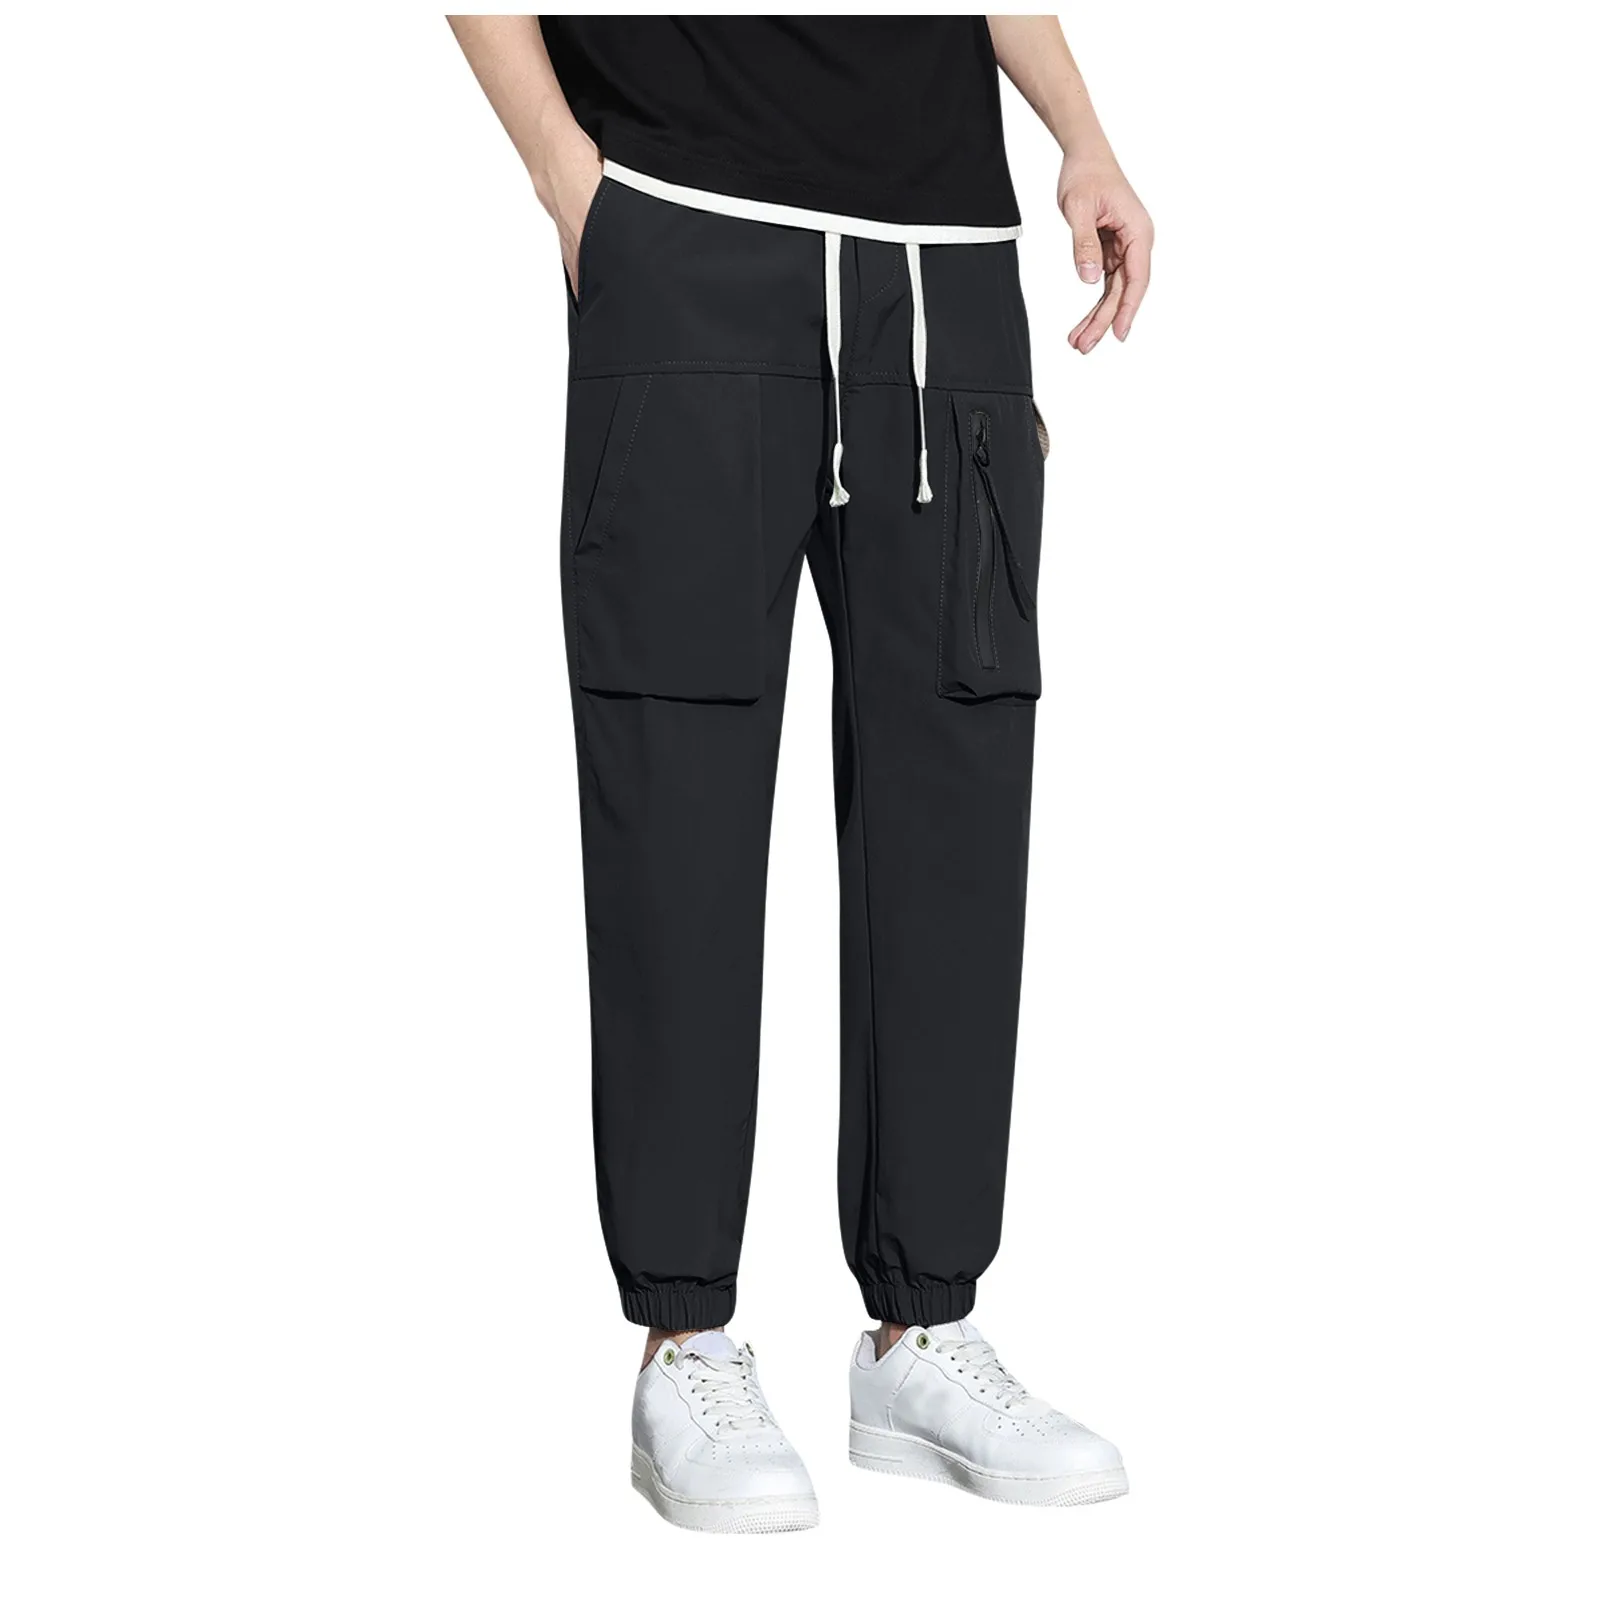 

Fashion Summer Casual Cargo Pants Solid Mens Cotton Sweatpants Trousers New Fitness Sport Jogging Tracksuits Pants Pantalones